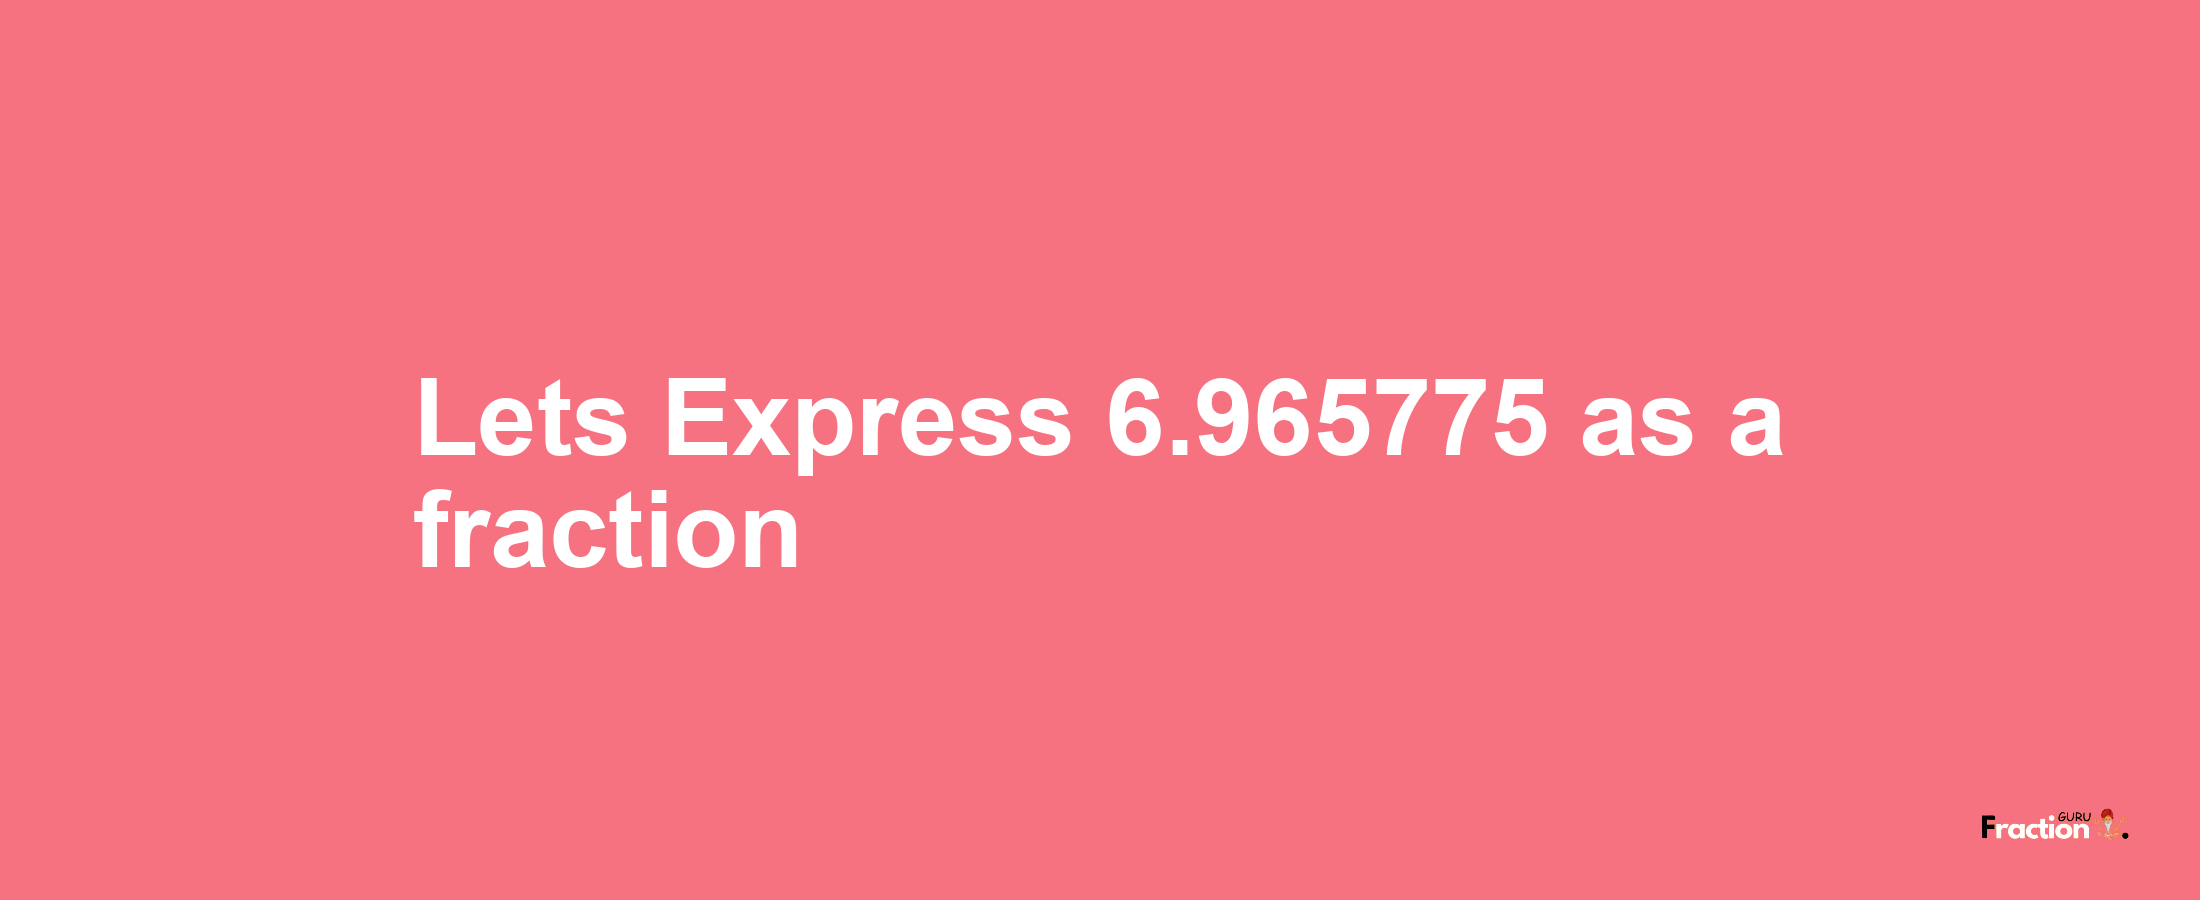 Lets Express 6.965775 as afraction